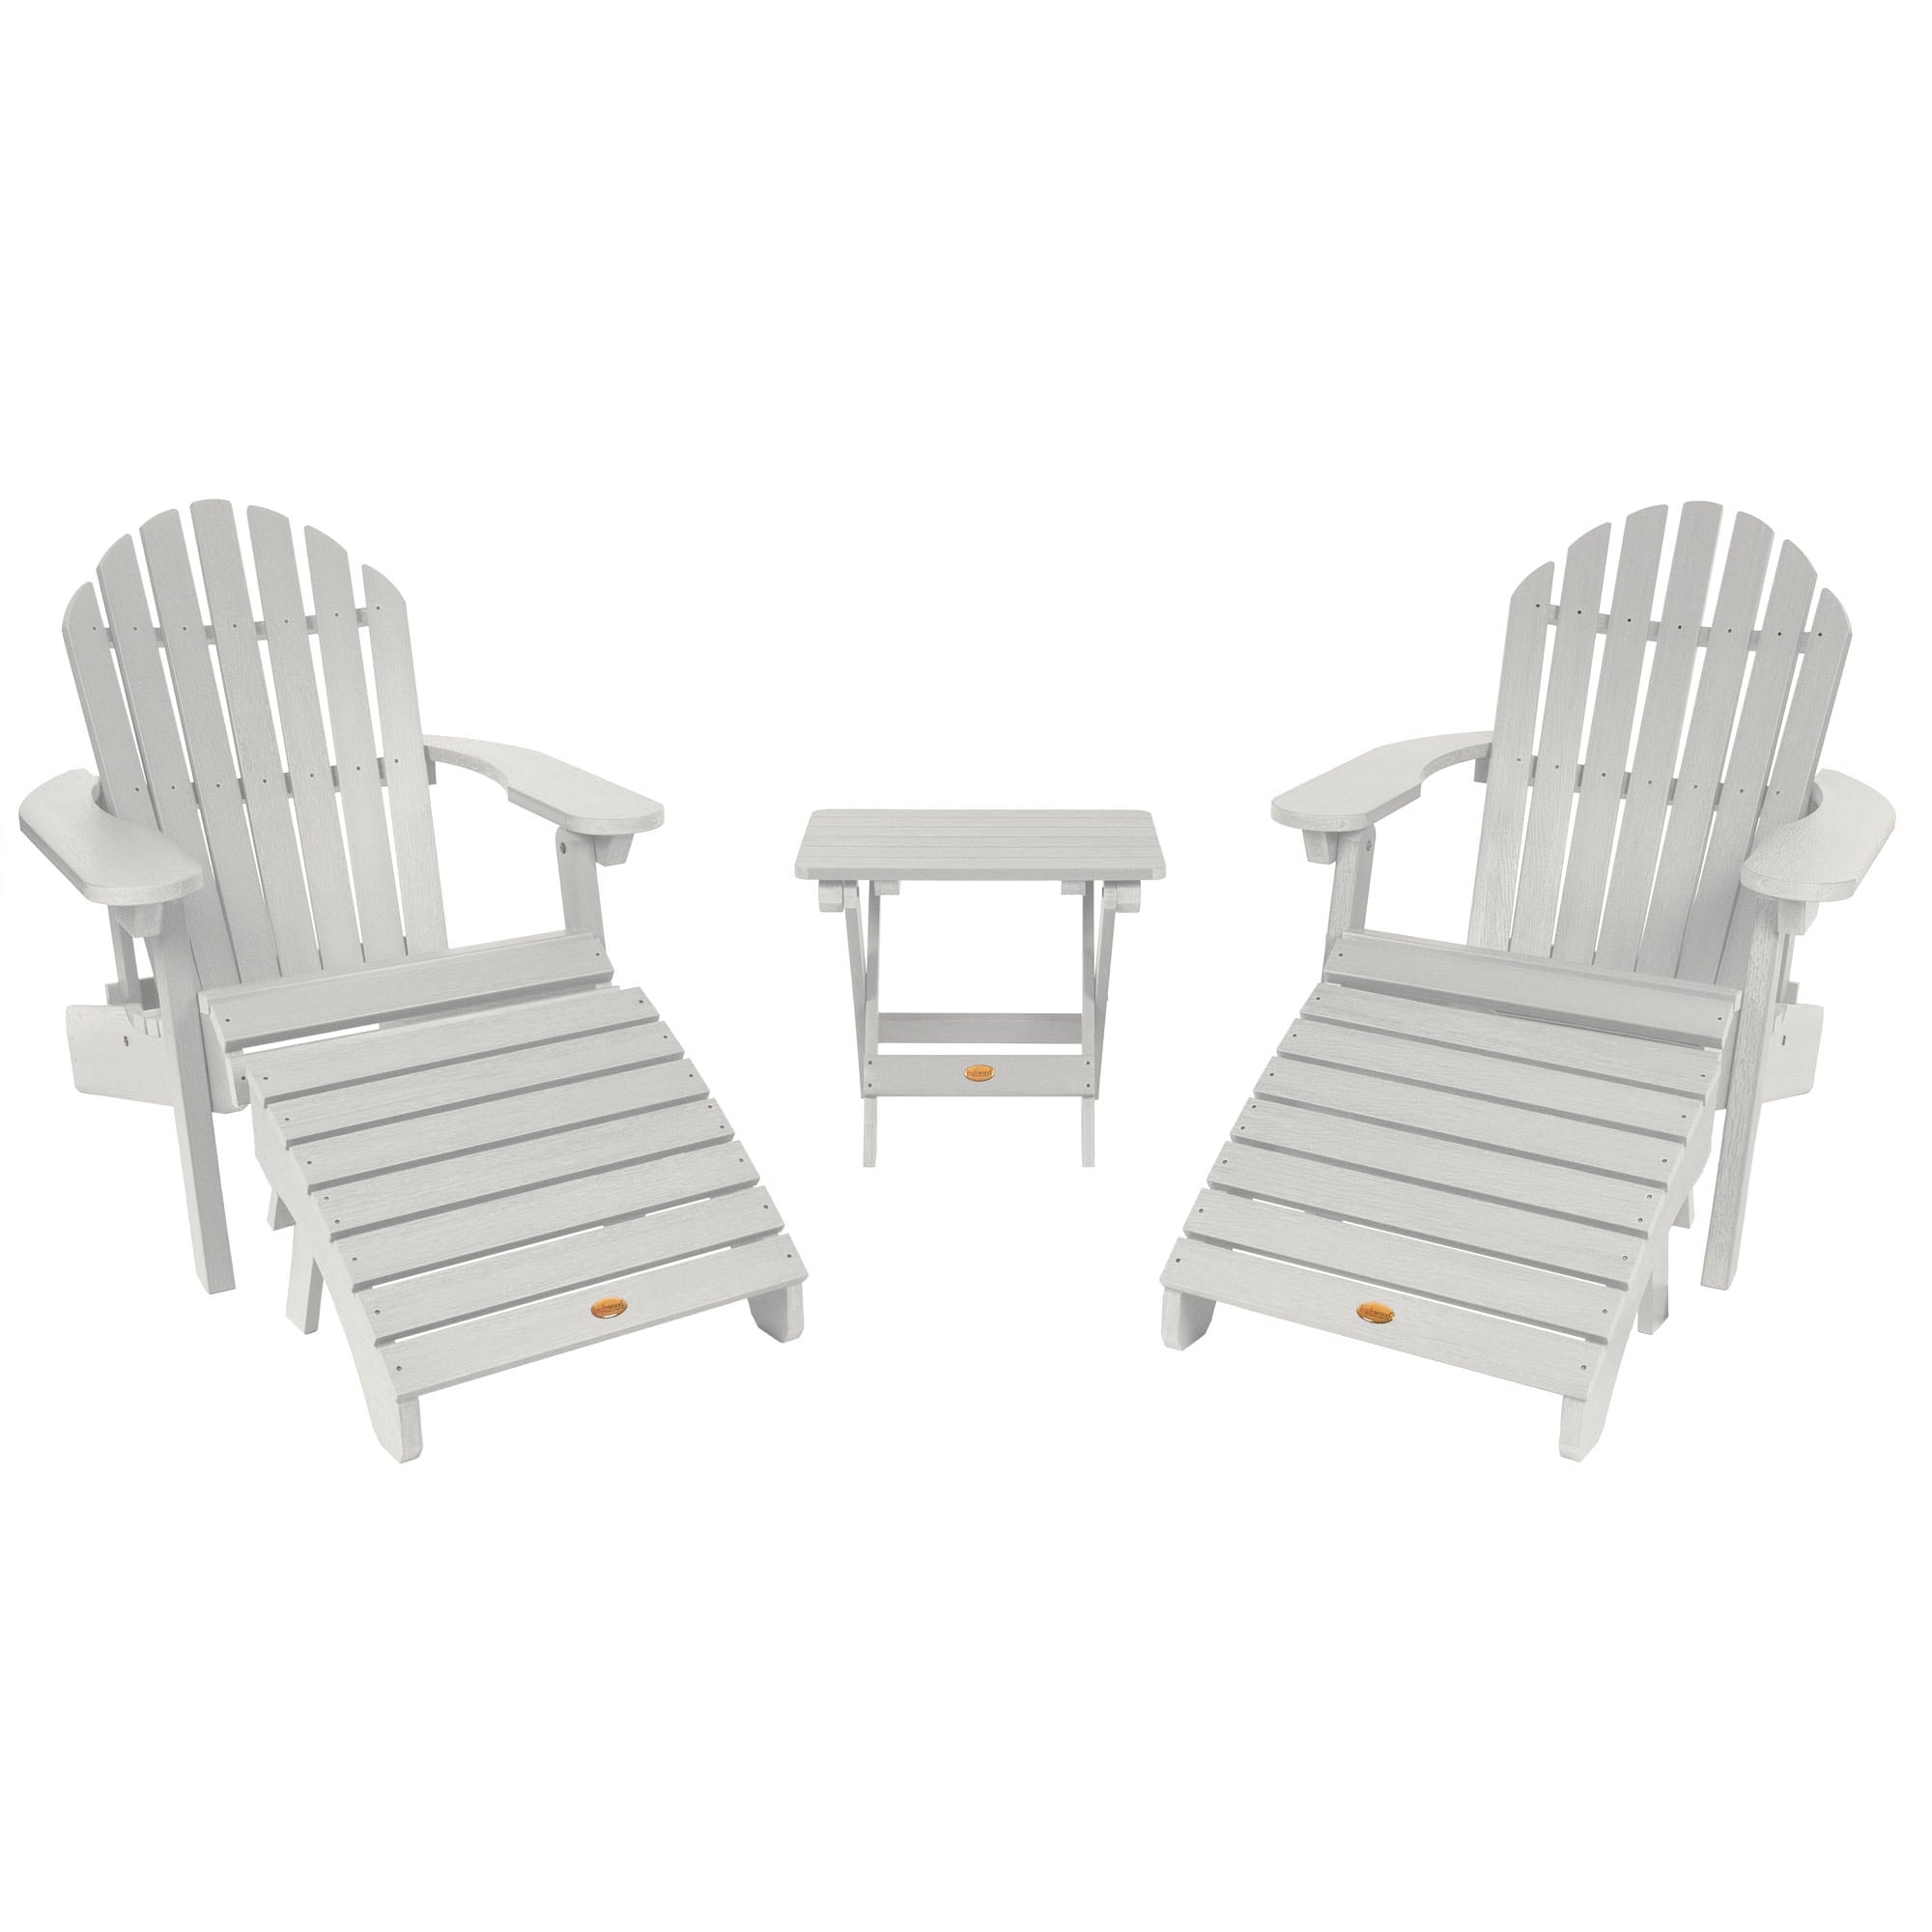 2 Reclining Adirondack Chairs With Matching Ottomans And Folding Side Table